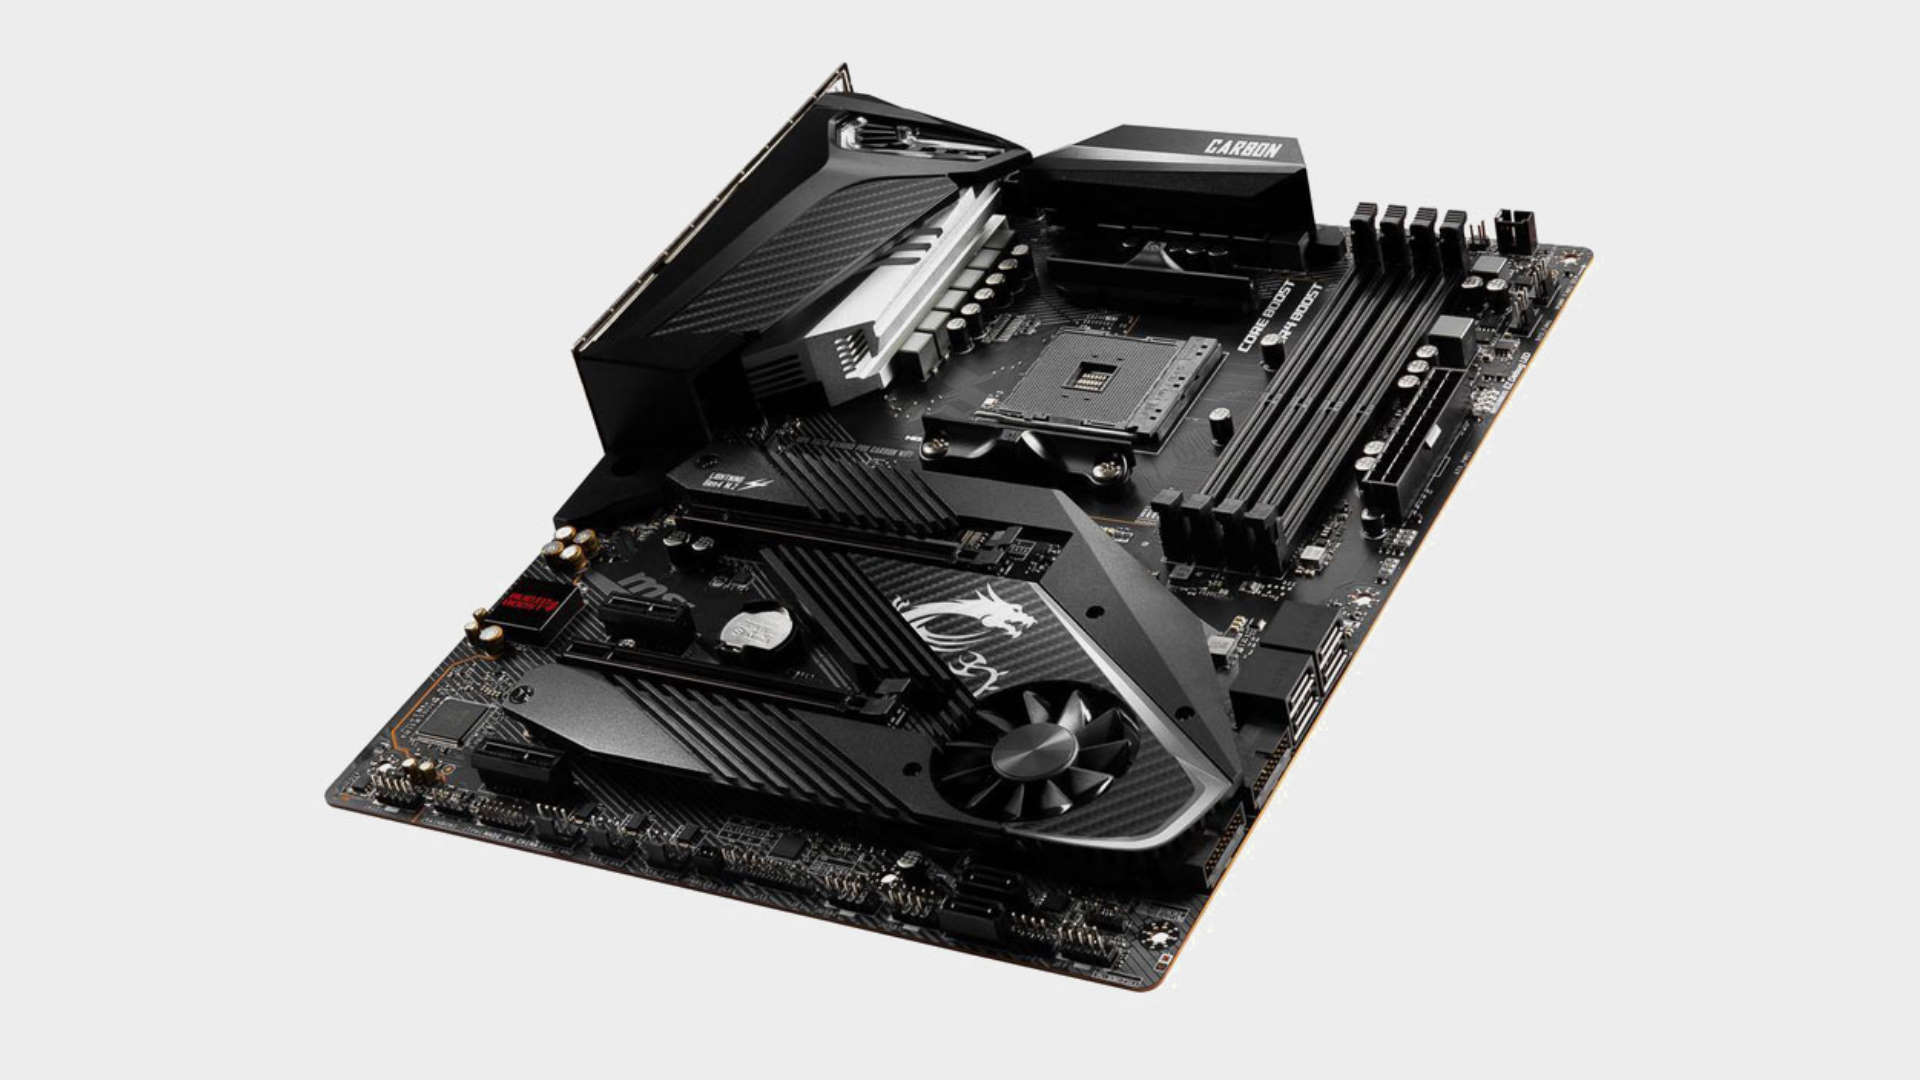 MSI MPG X570 Gaming Pro Carbon WiFi motherboard topdown view on grey background, with glowing side